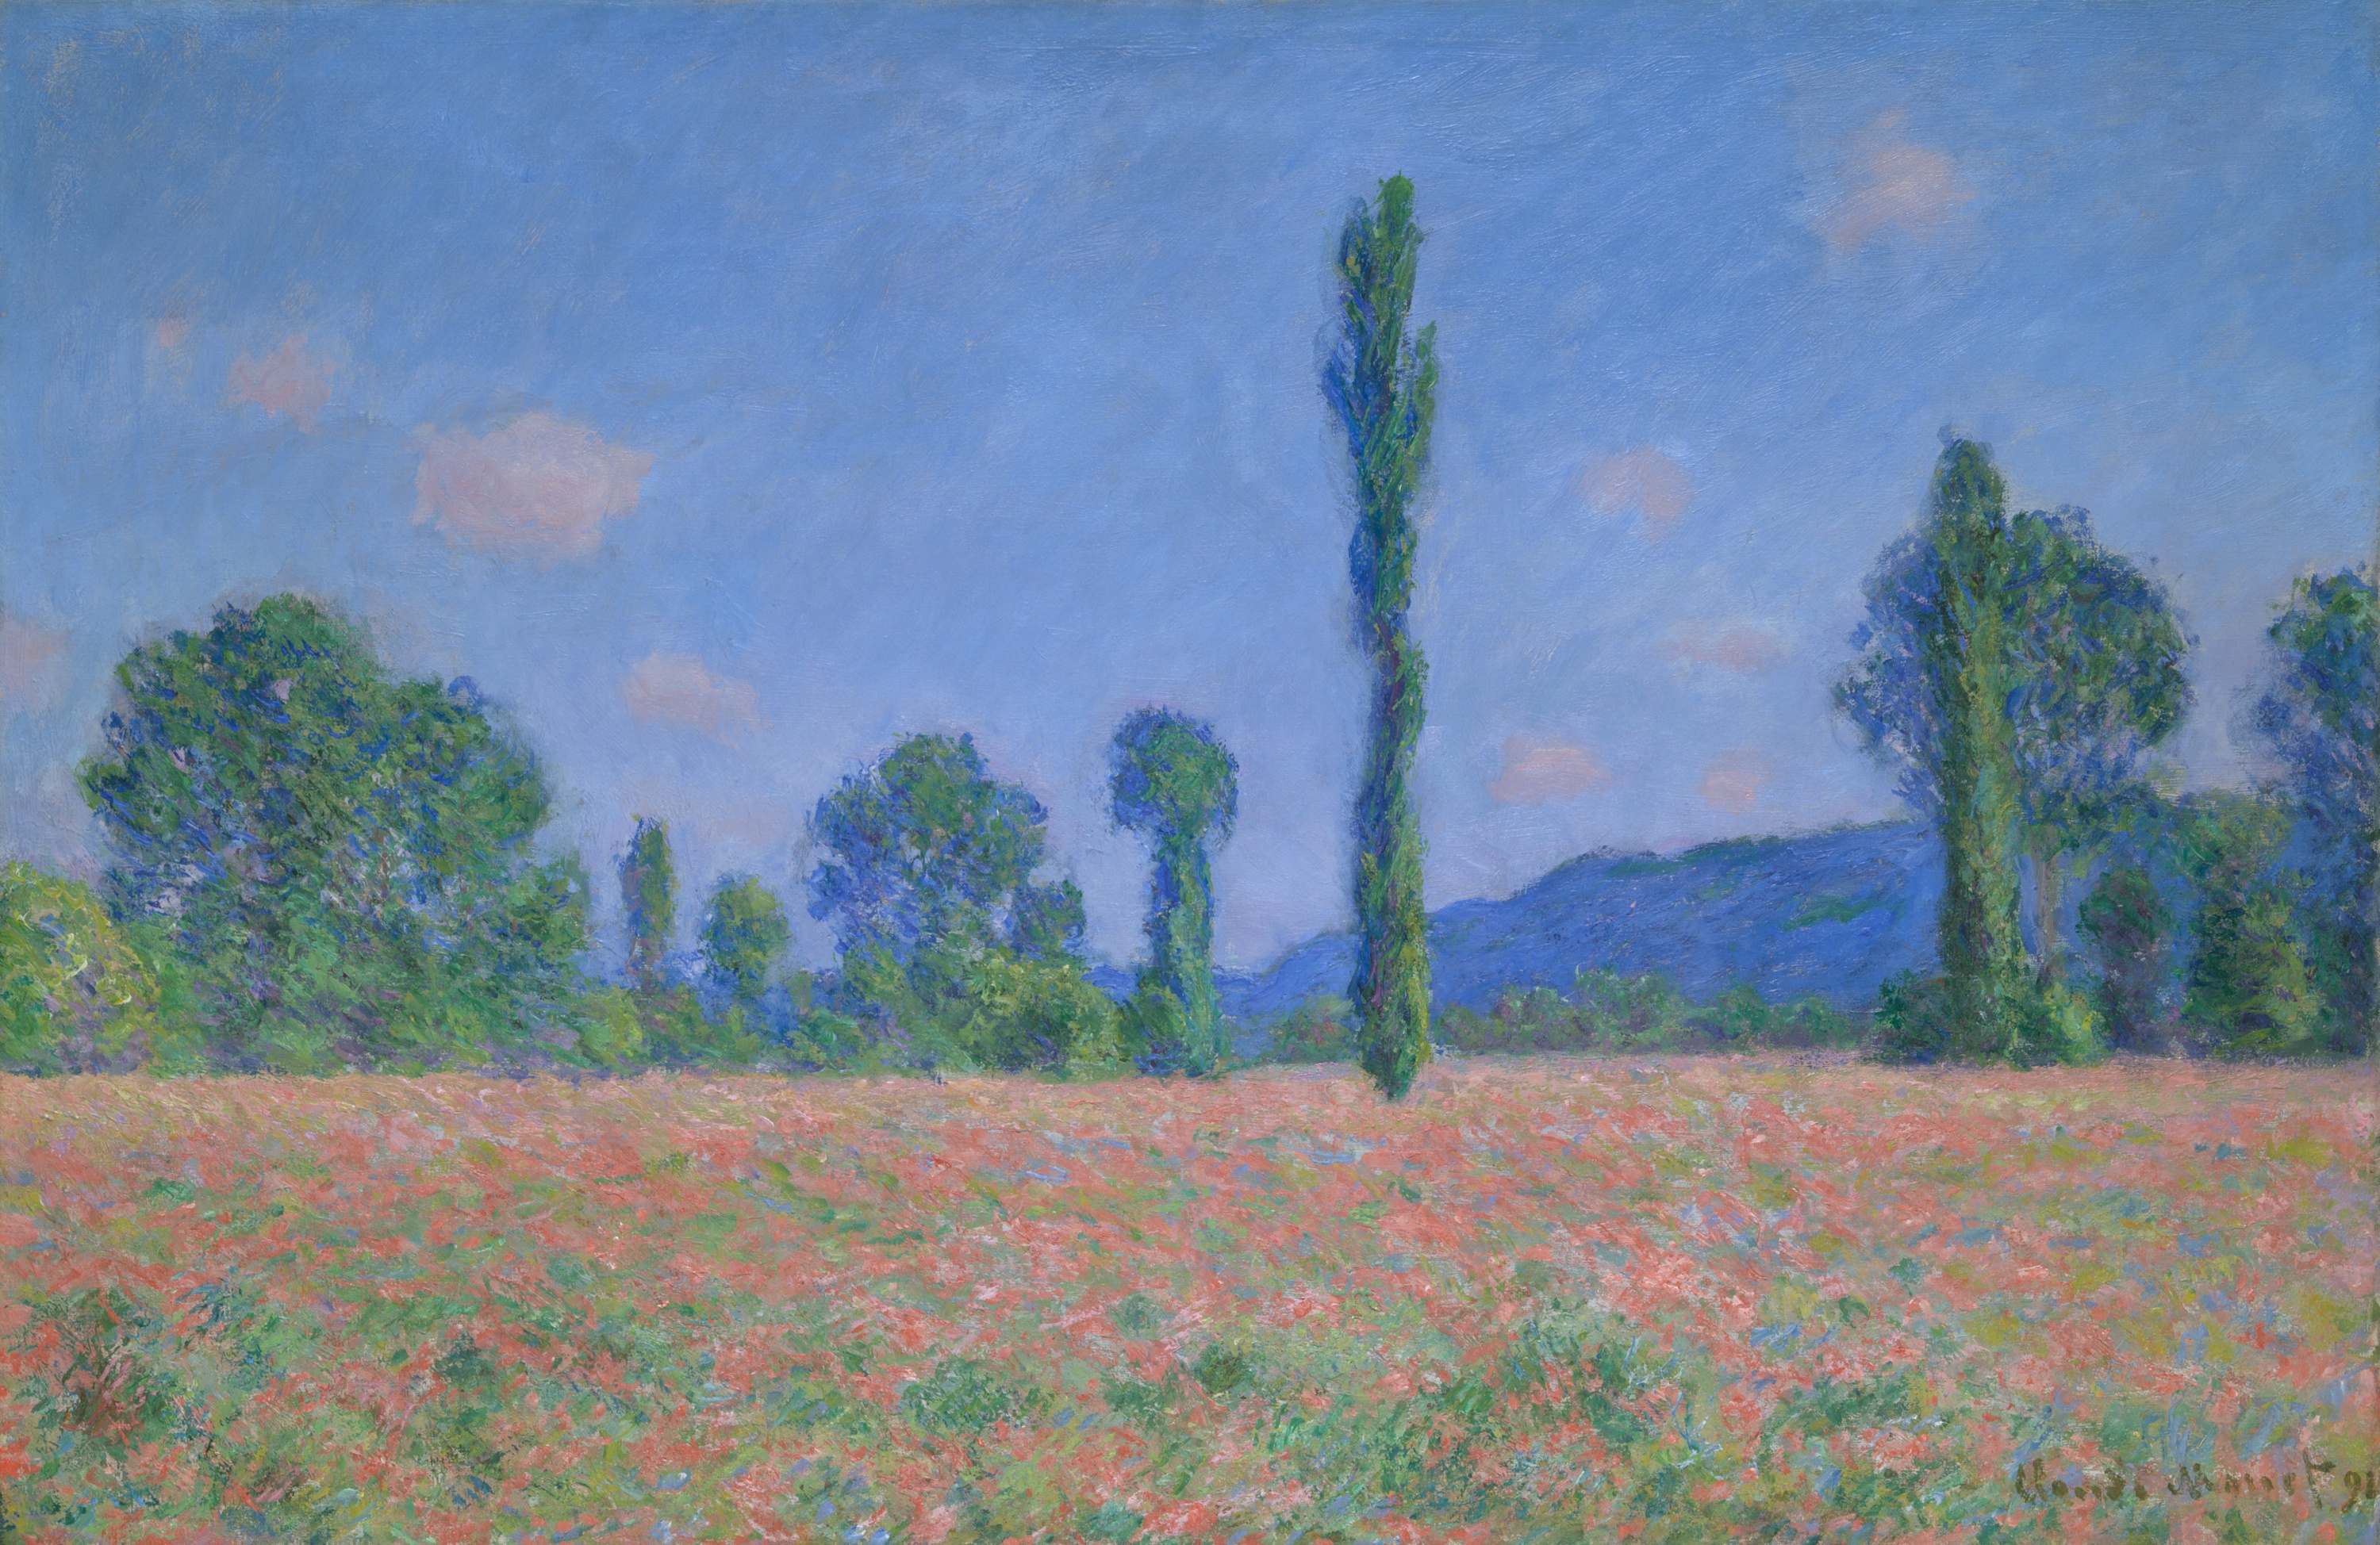 Poppy Field (Giverny) by Claude Monet - 1890/91 - 61.2 × 93.4 cm Art Institute of Chicago